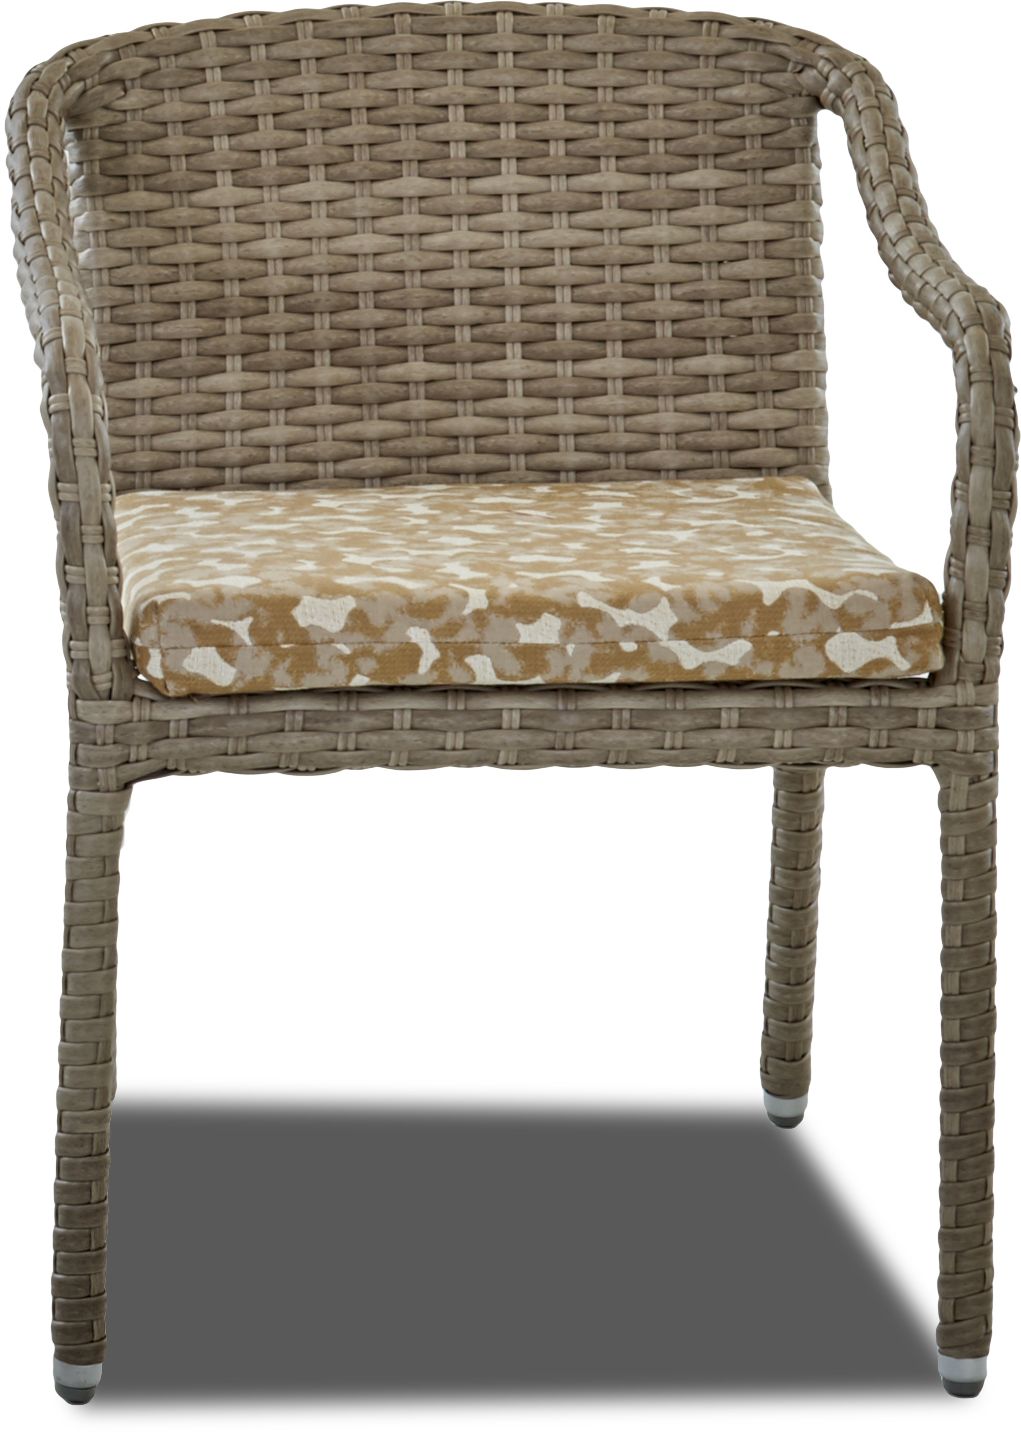 Klaussner® Outdoor Mesa Seacoast Stack Dining Chair